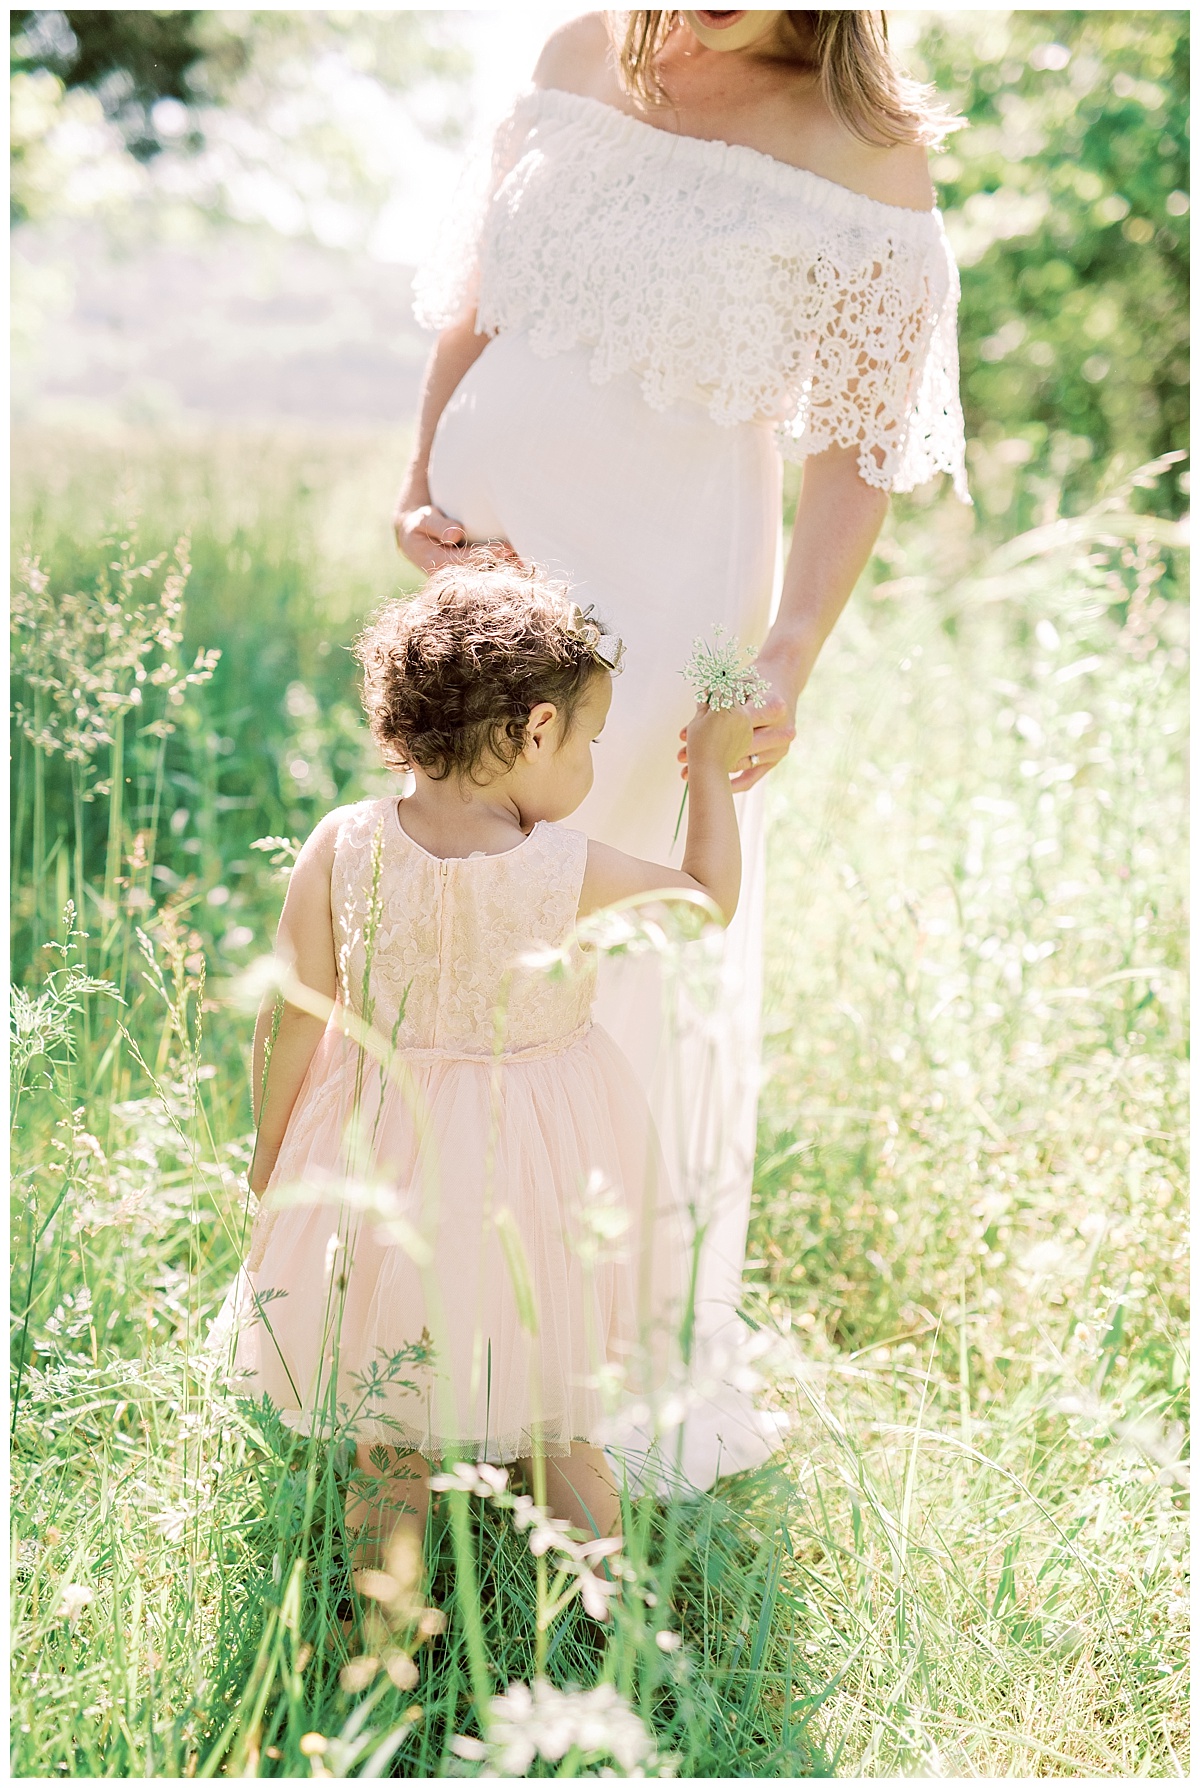 Outdoor family maternity session in Murfreesboro, TN by Grace Paul Photography.